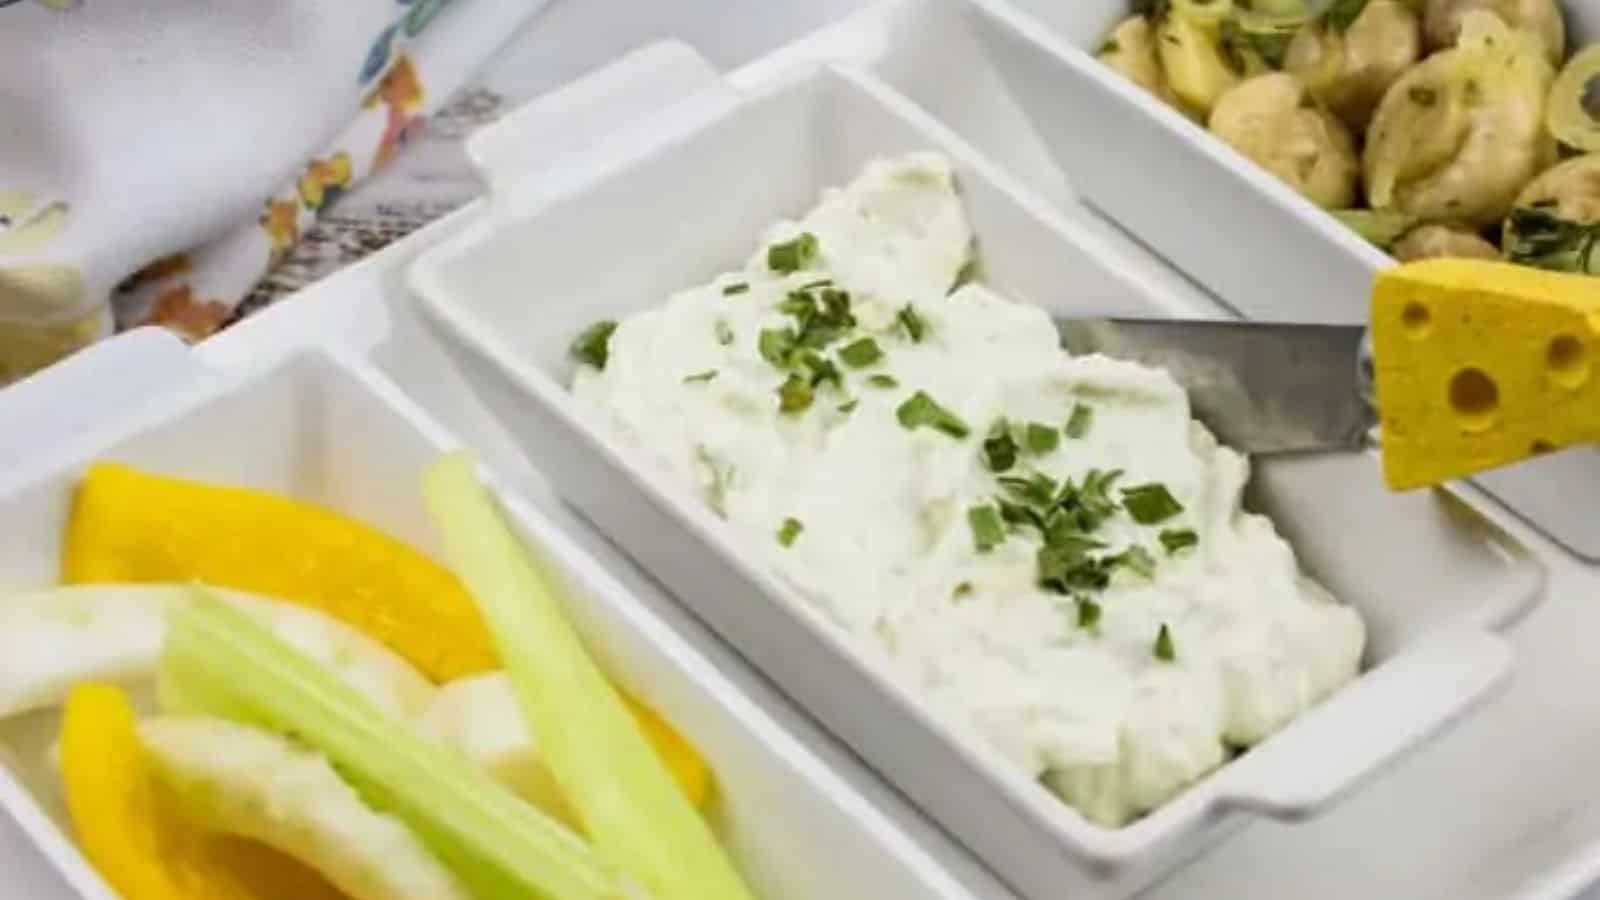 Close-up image of blue cheese dip in the middle of other dishes.